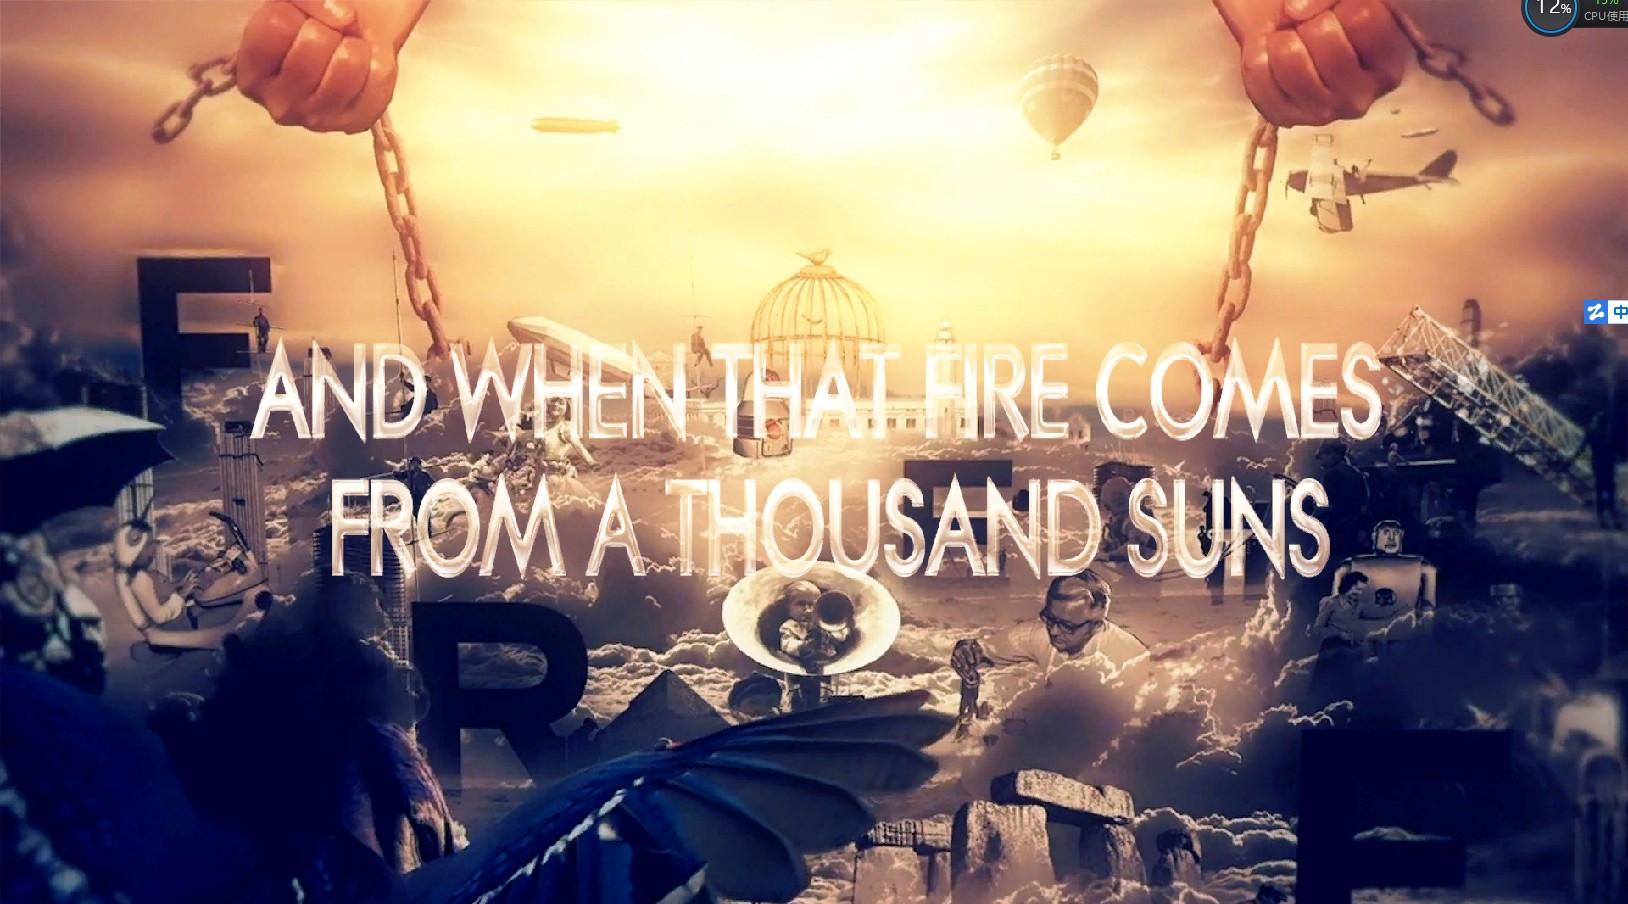 Army of Fire intro